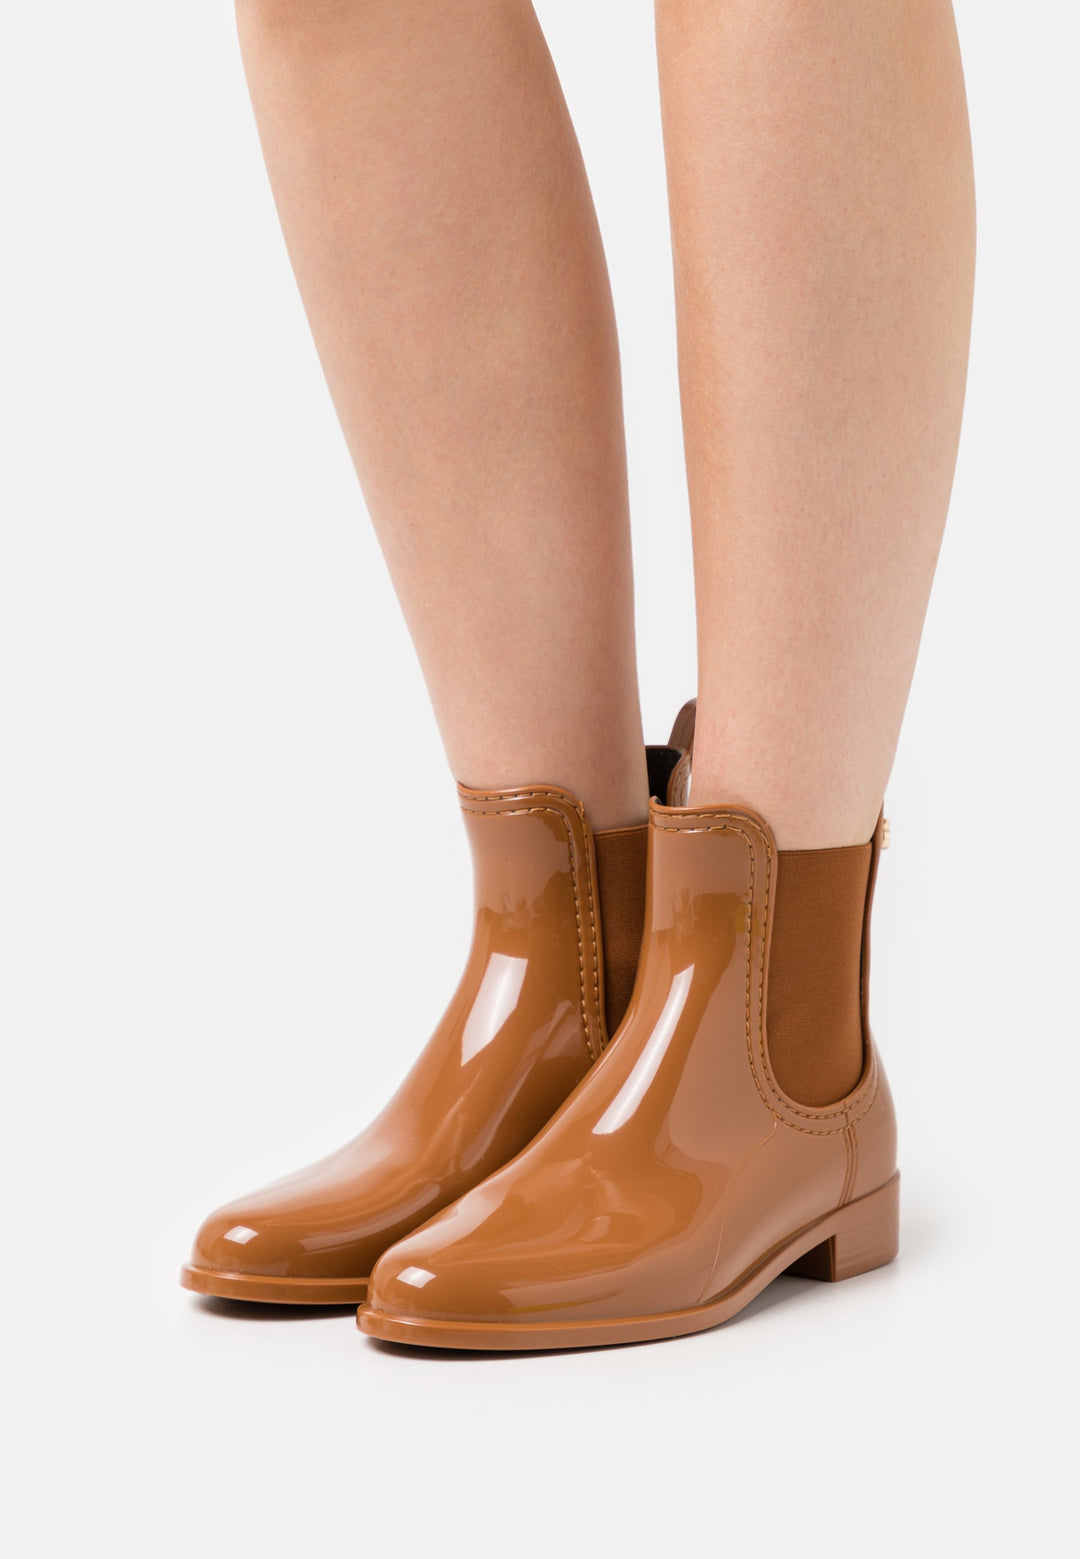 Comfy Boots - Canyon | Lemon Jelly - Clearance